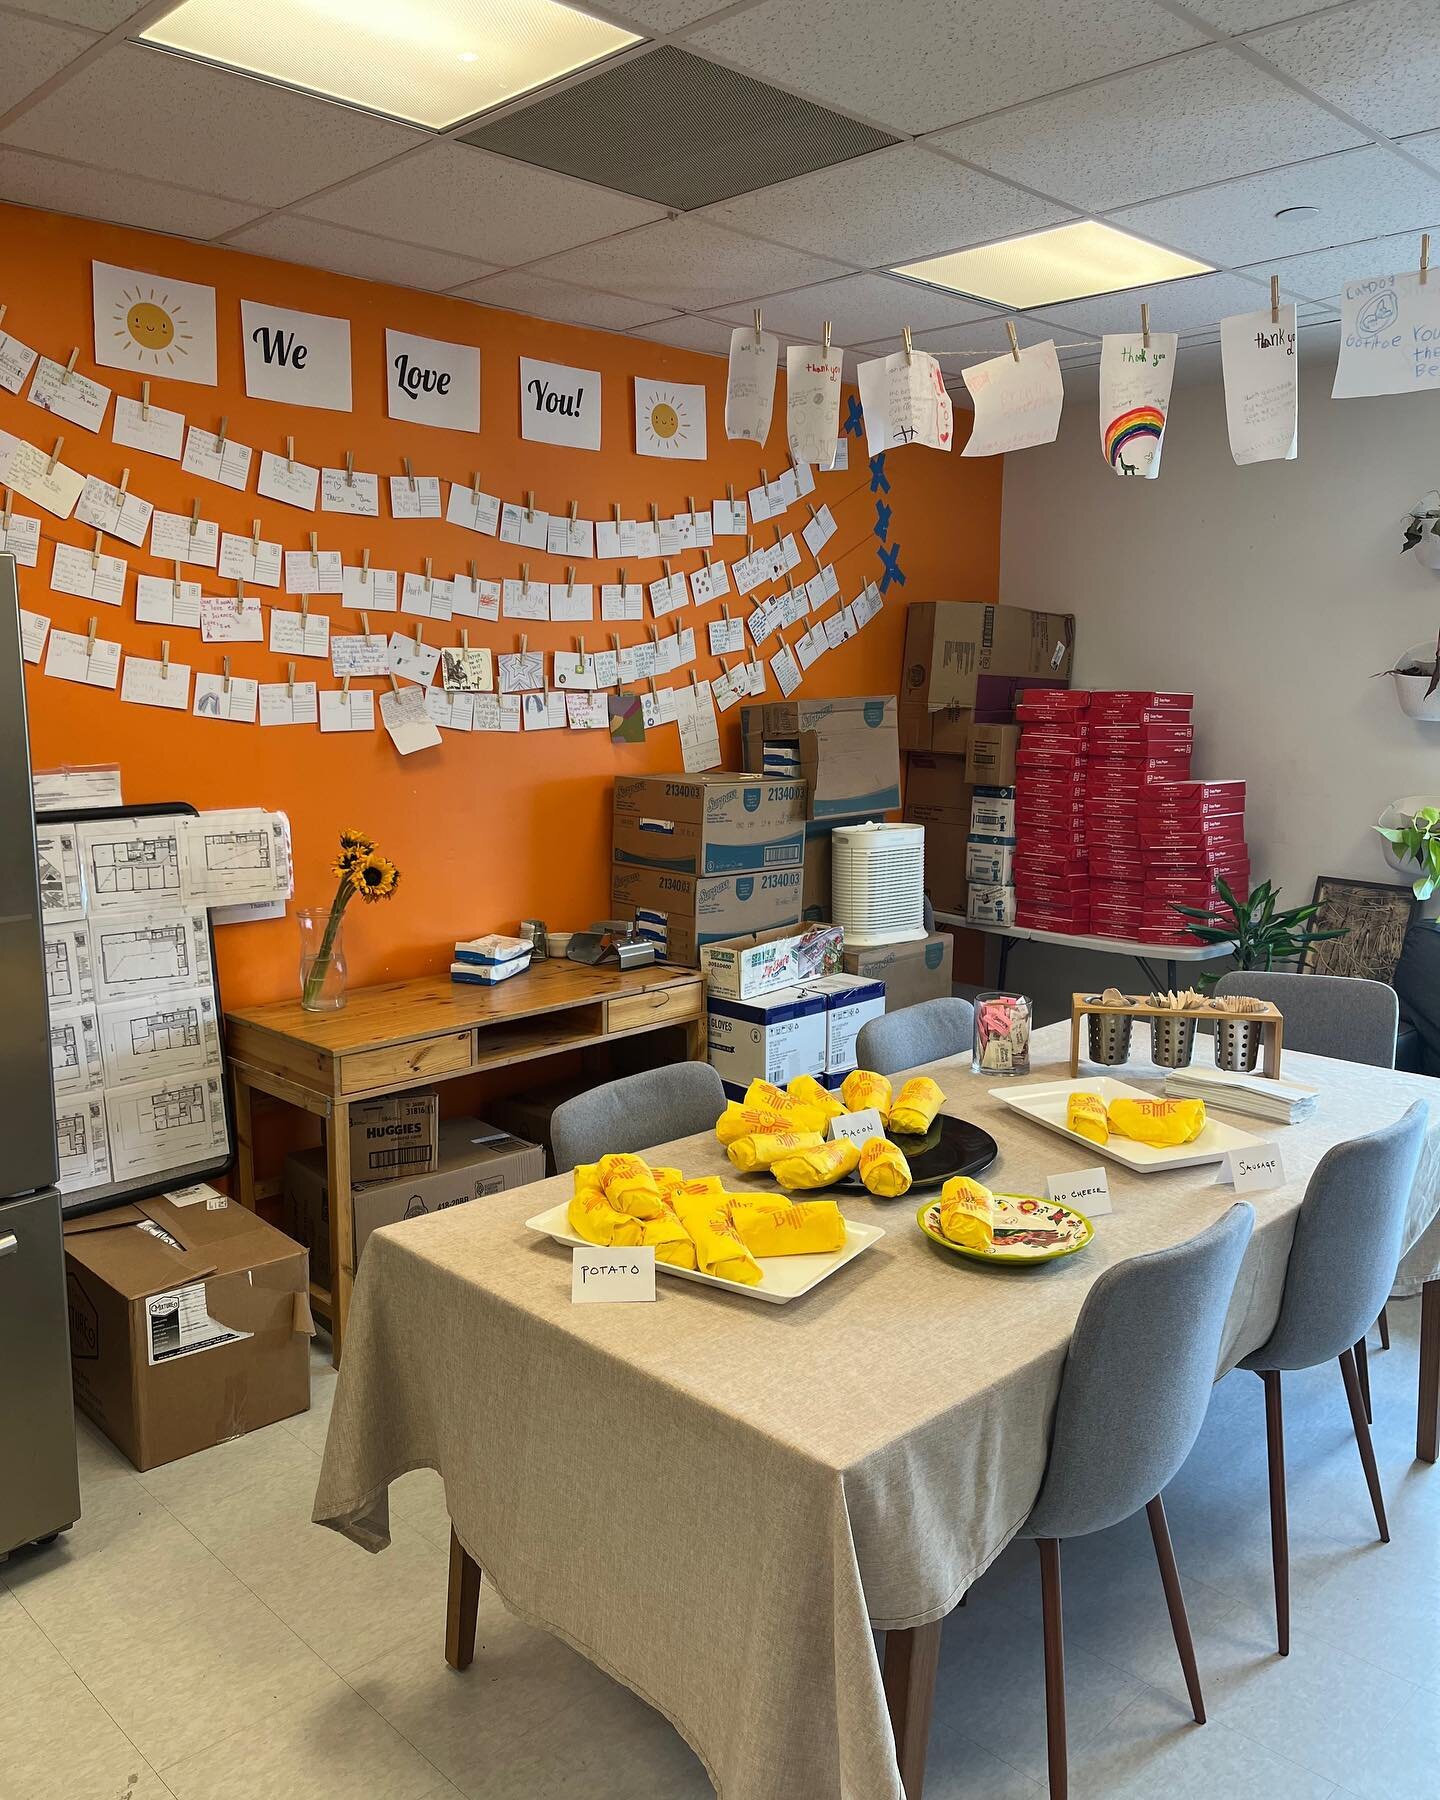 We love our teachers!  As a small token of our thanks the PA hosted breakfast burritos from @santafebk and coffee from @palomacoffeebakery to mark teacher appreciation week at the K-8 campus.